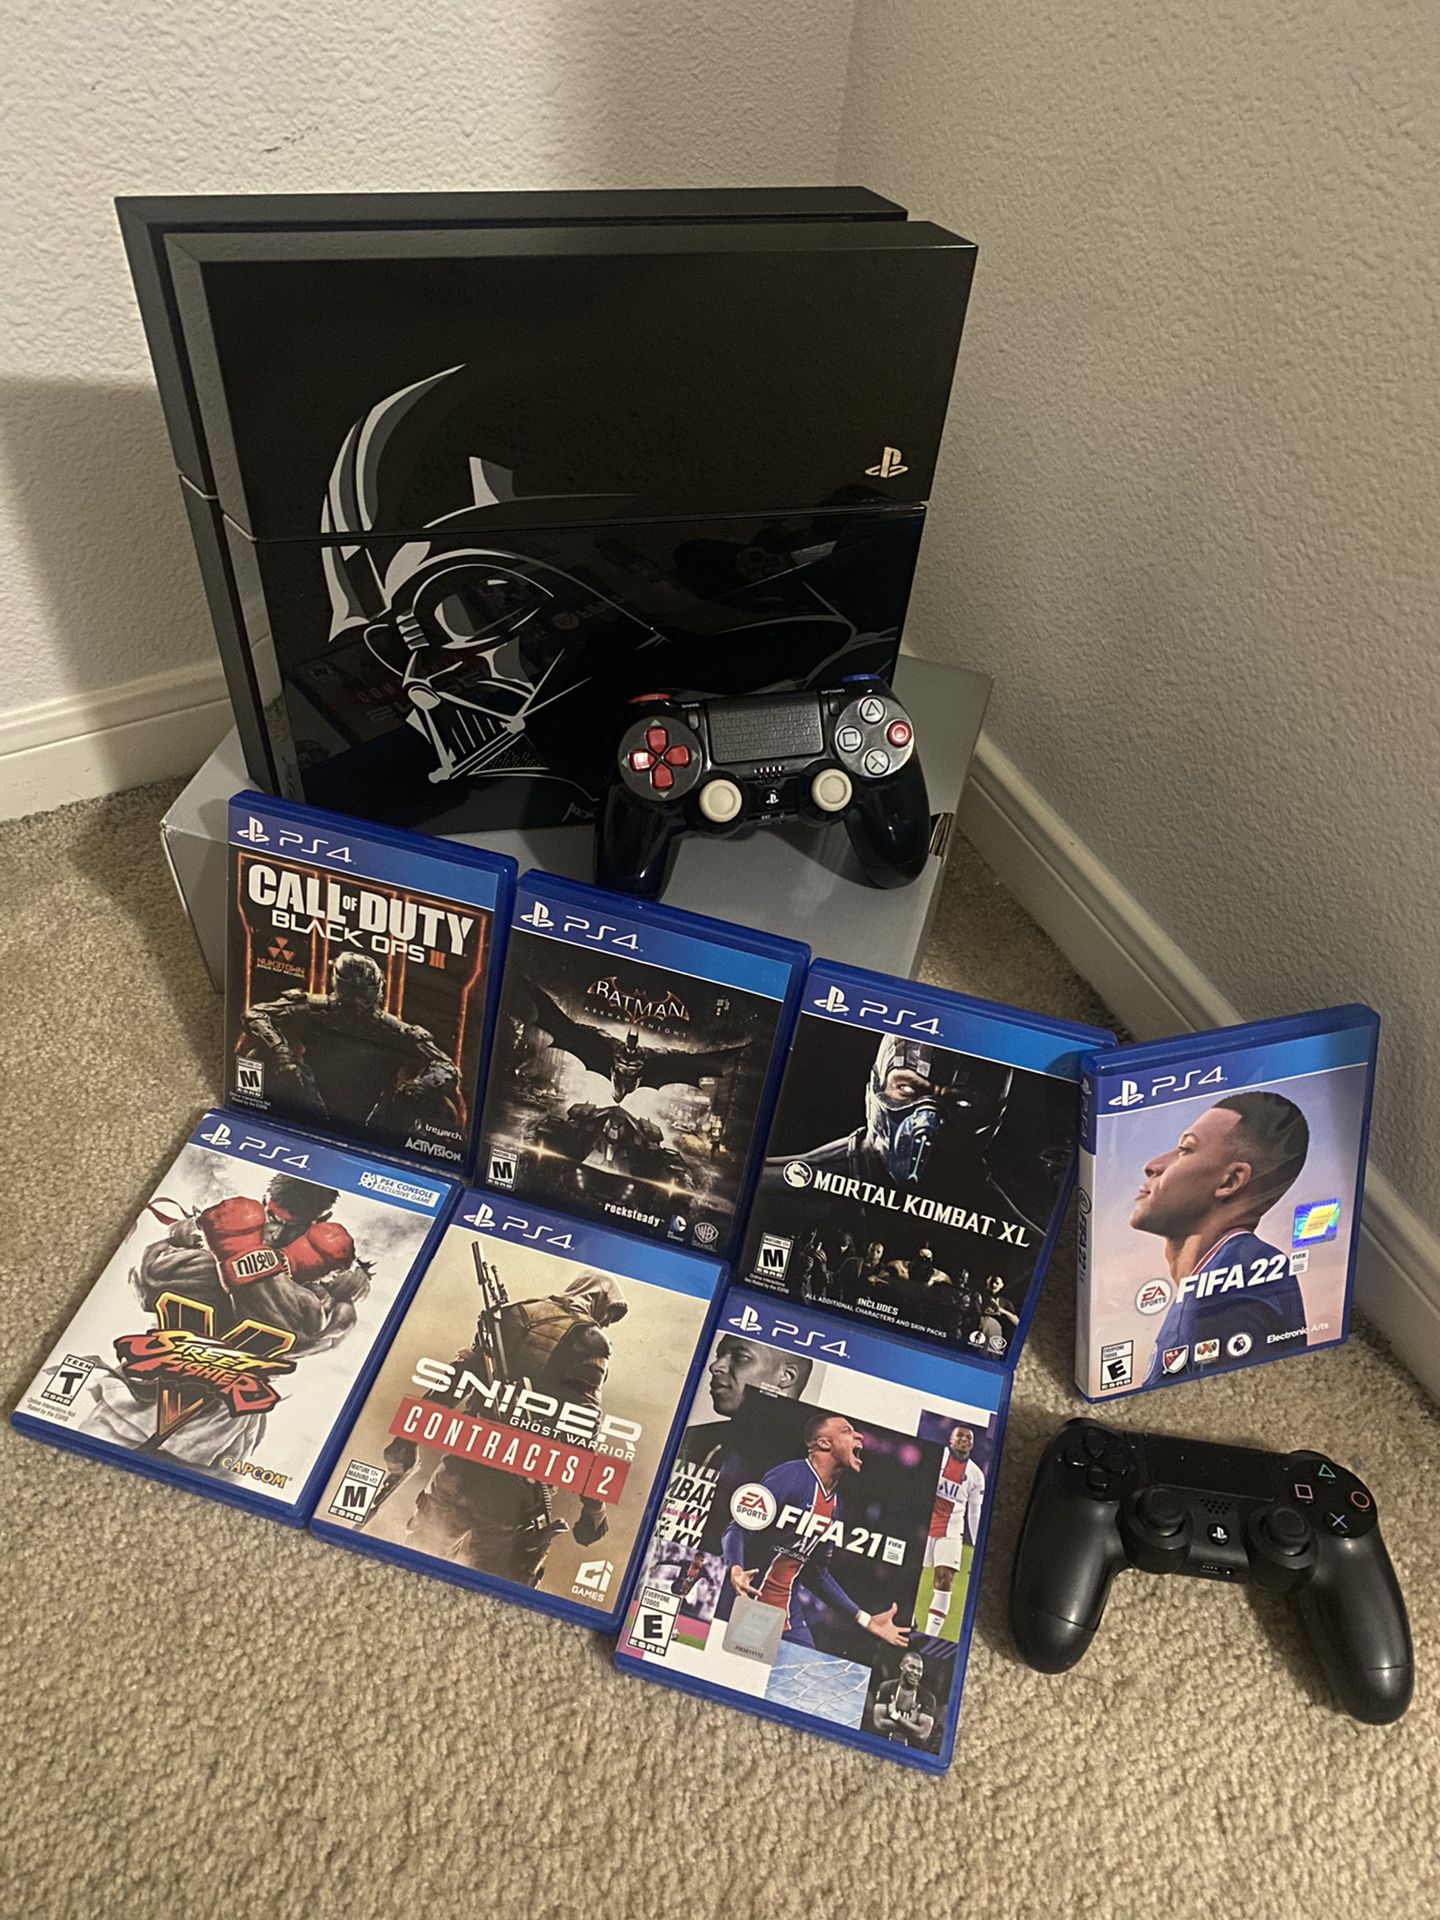 PS4 w/games